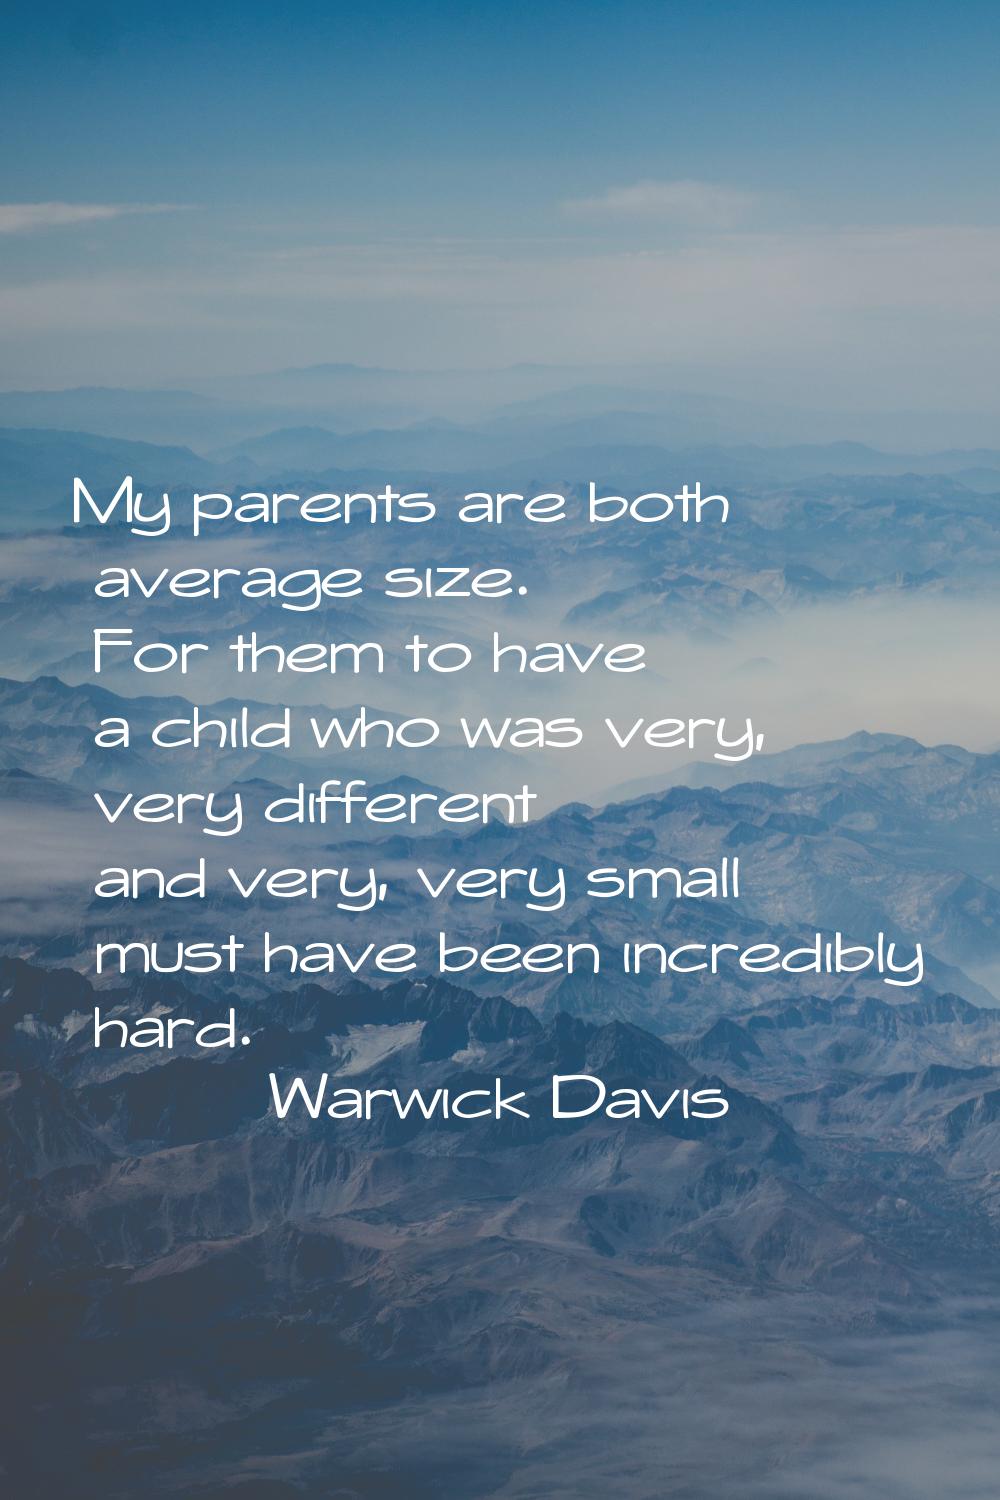 My parents are both average size. For them to have a child who was very, very different and very, v